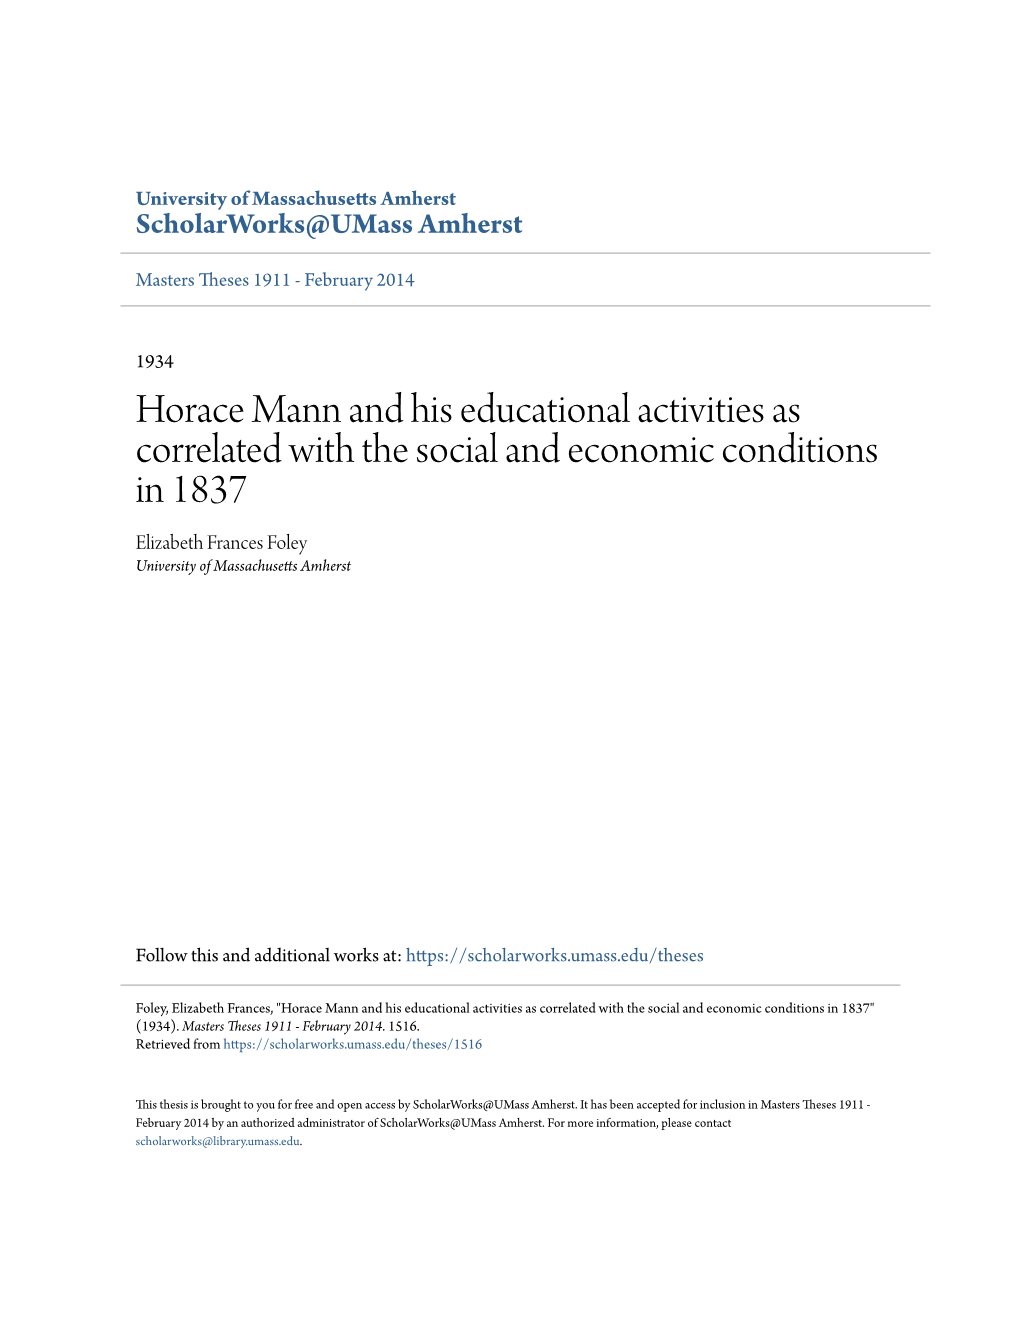 Horace Mann and His Educational Activities As Correlated with the Social and Economic Conditions in 1837 Elizabeth Frances Foley University of Massachusetts Amherst